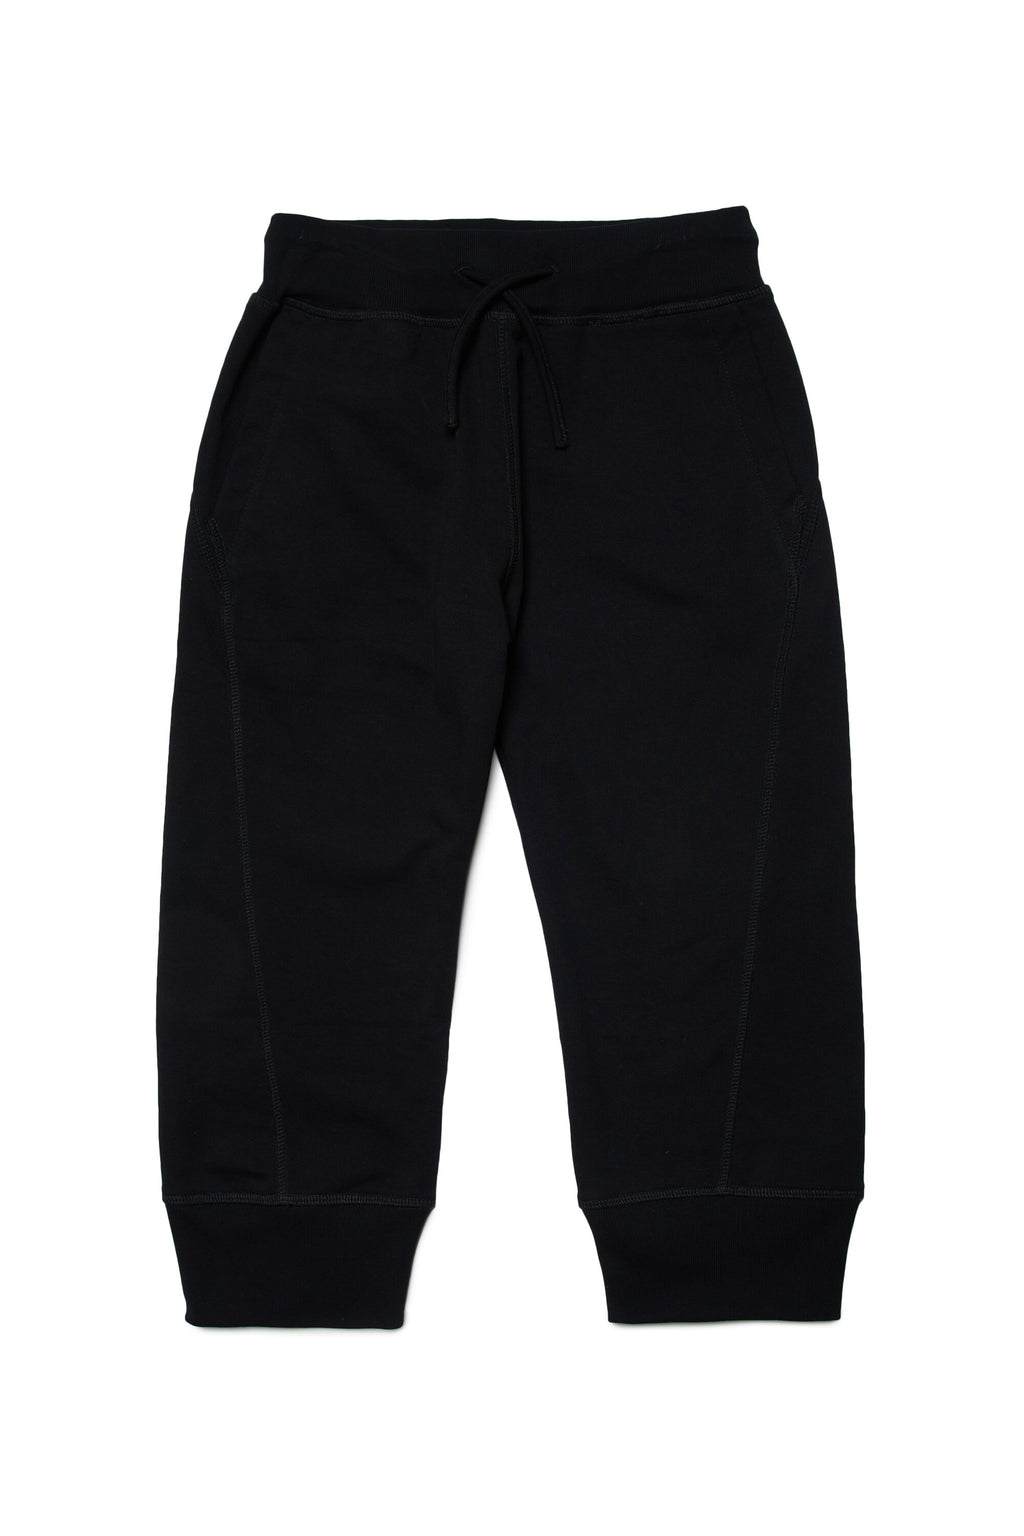 Fleece jogger pants with graphic leaf logo